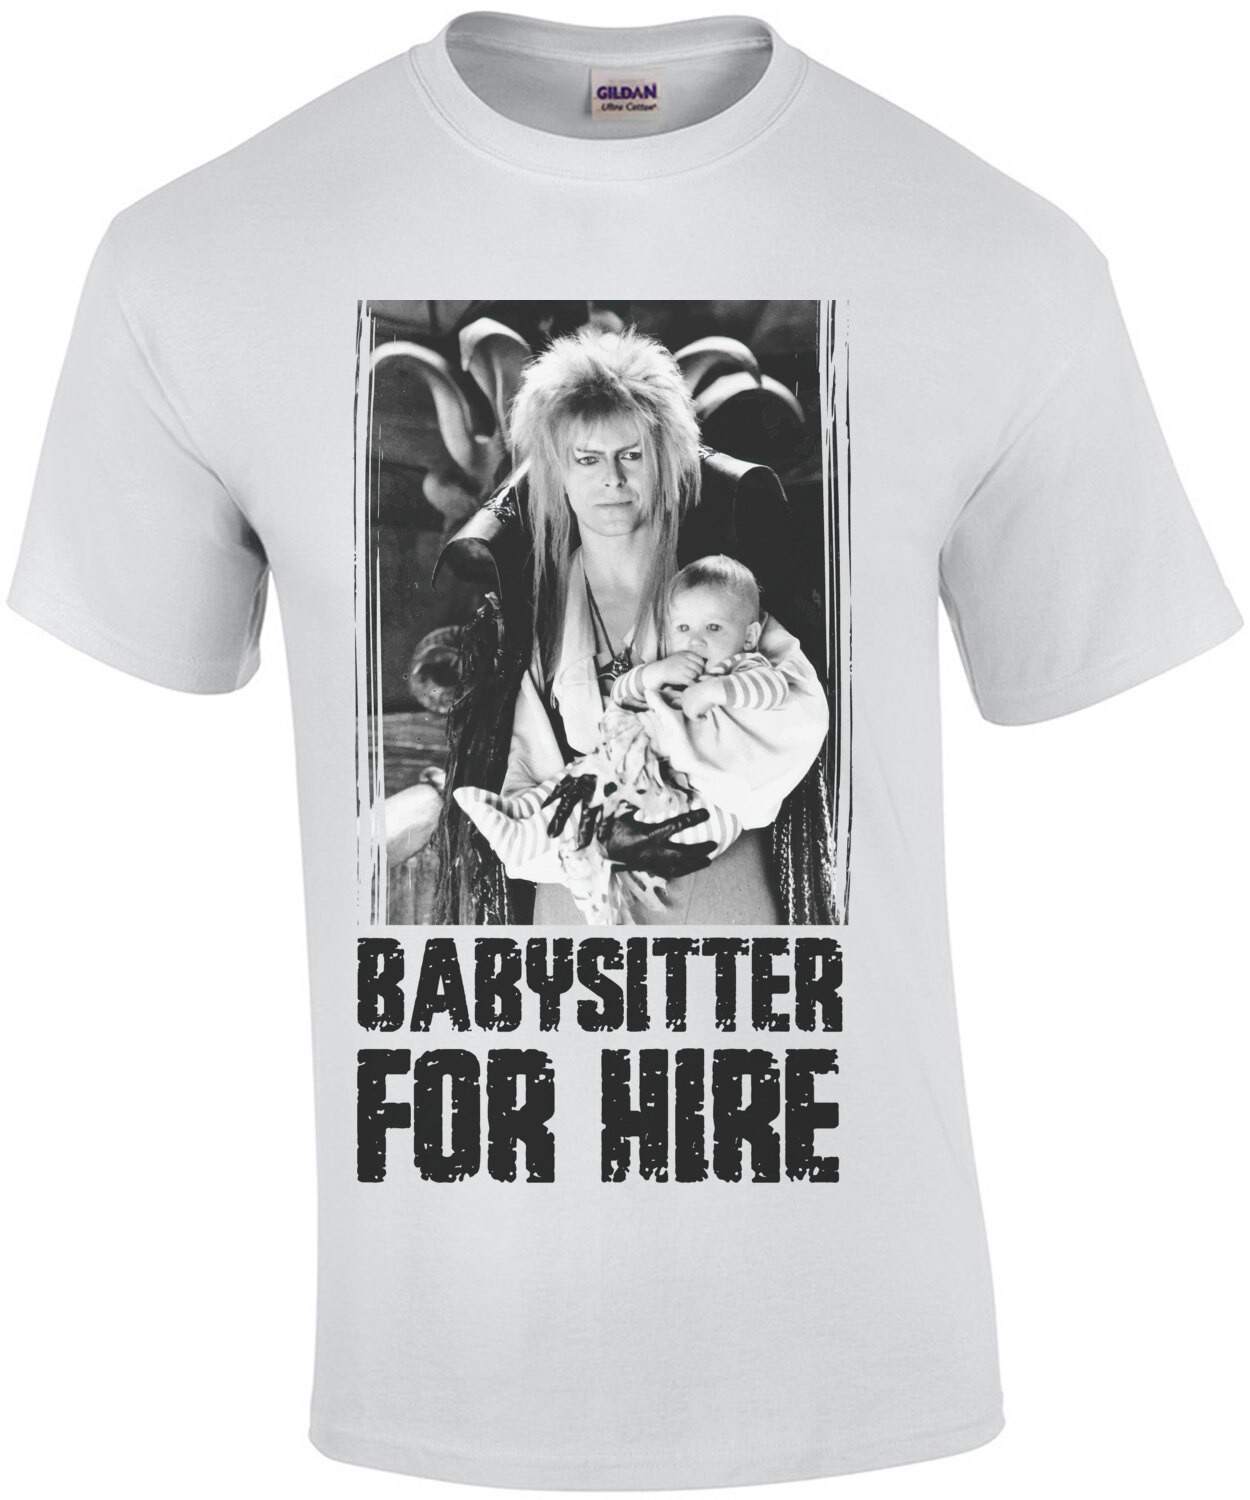 Babysitter For Hire - David Bowie - Labyrinth 80's T-Shirt